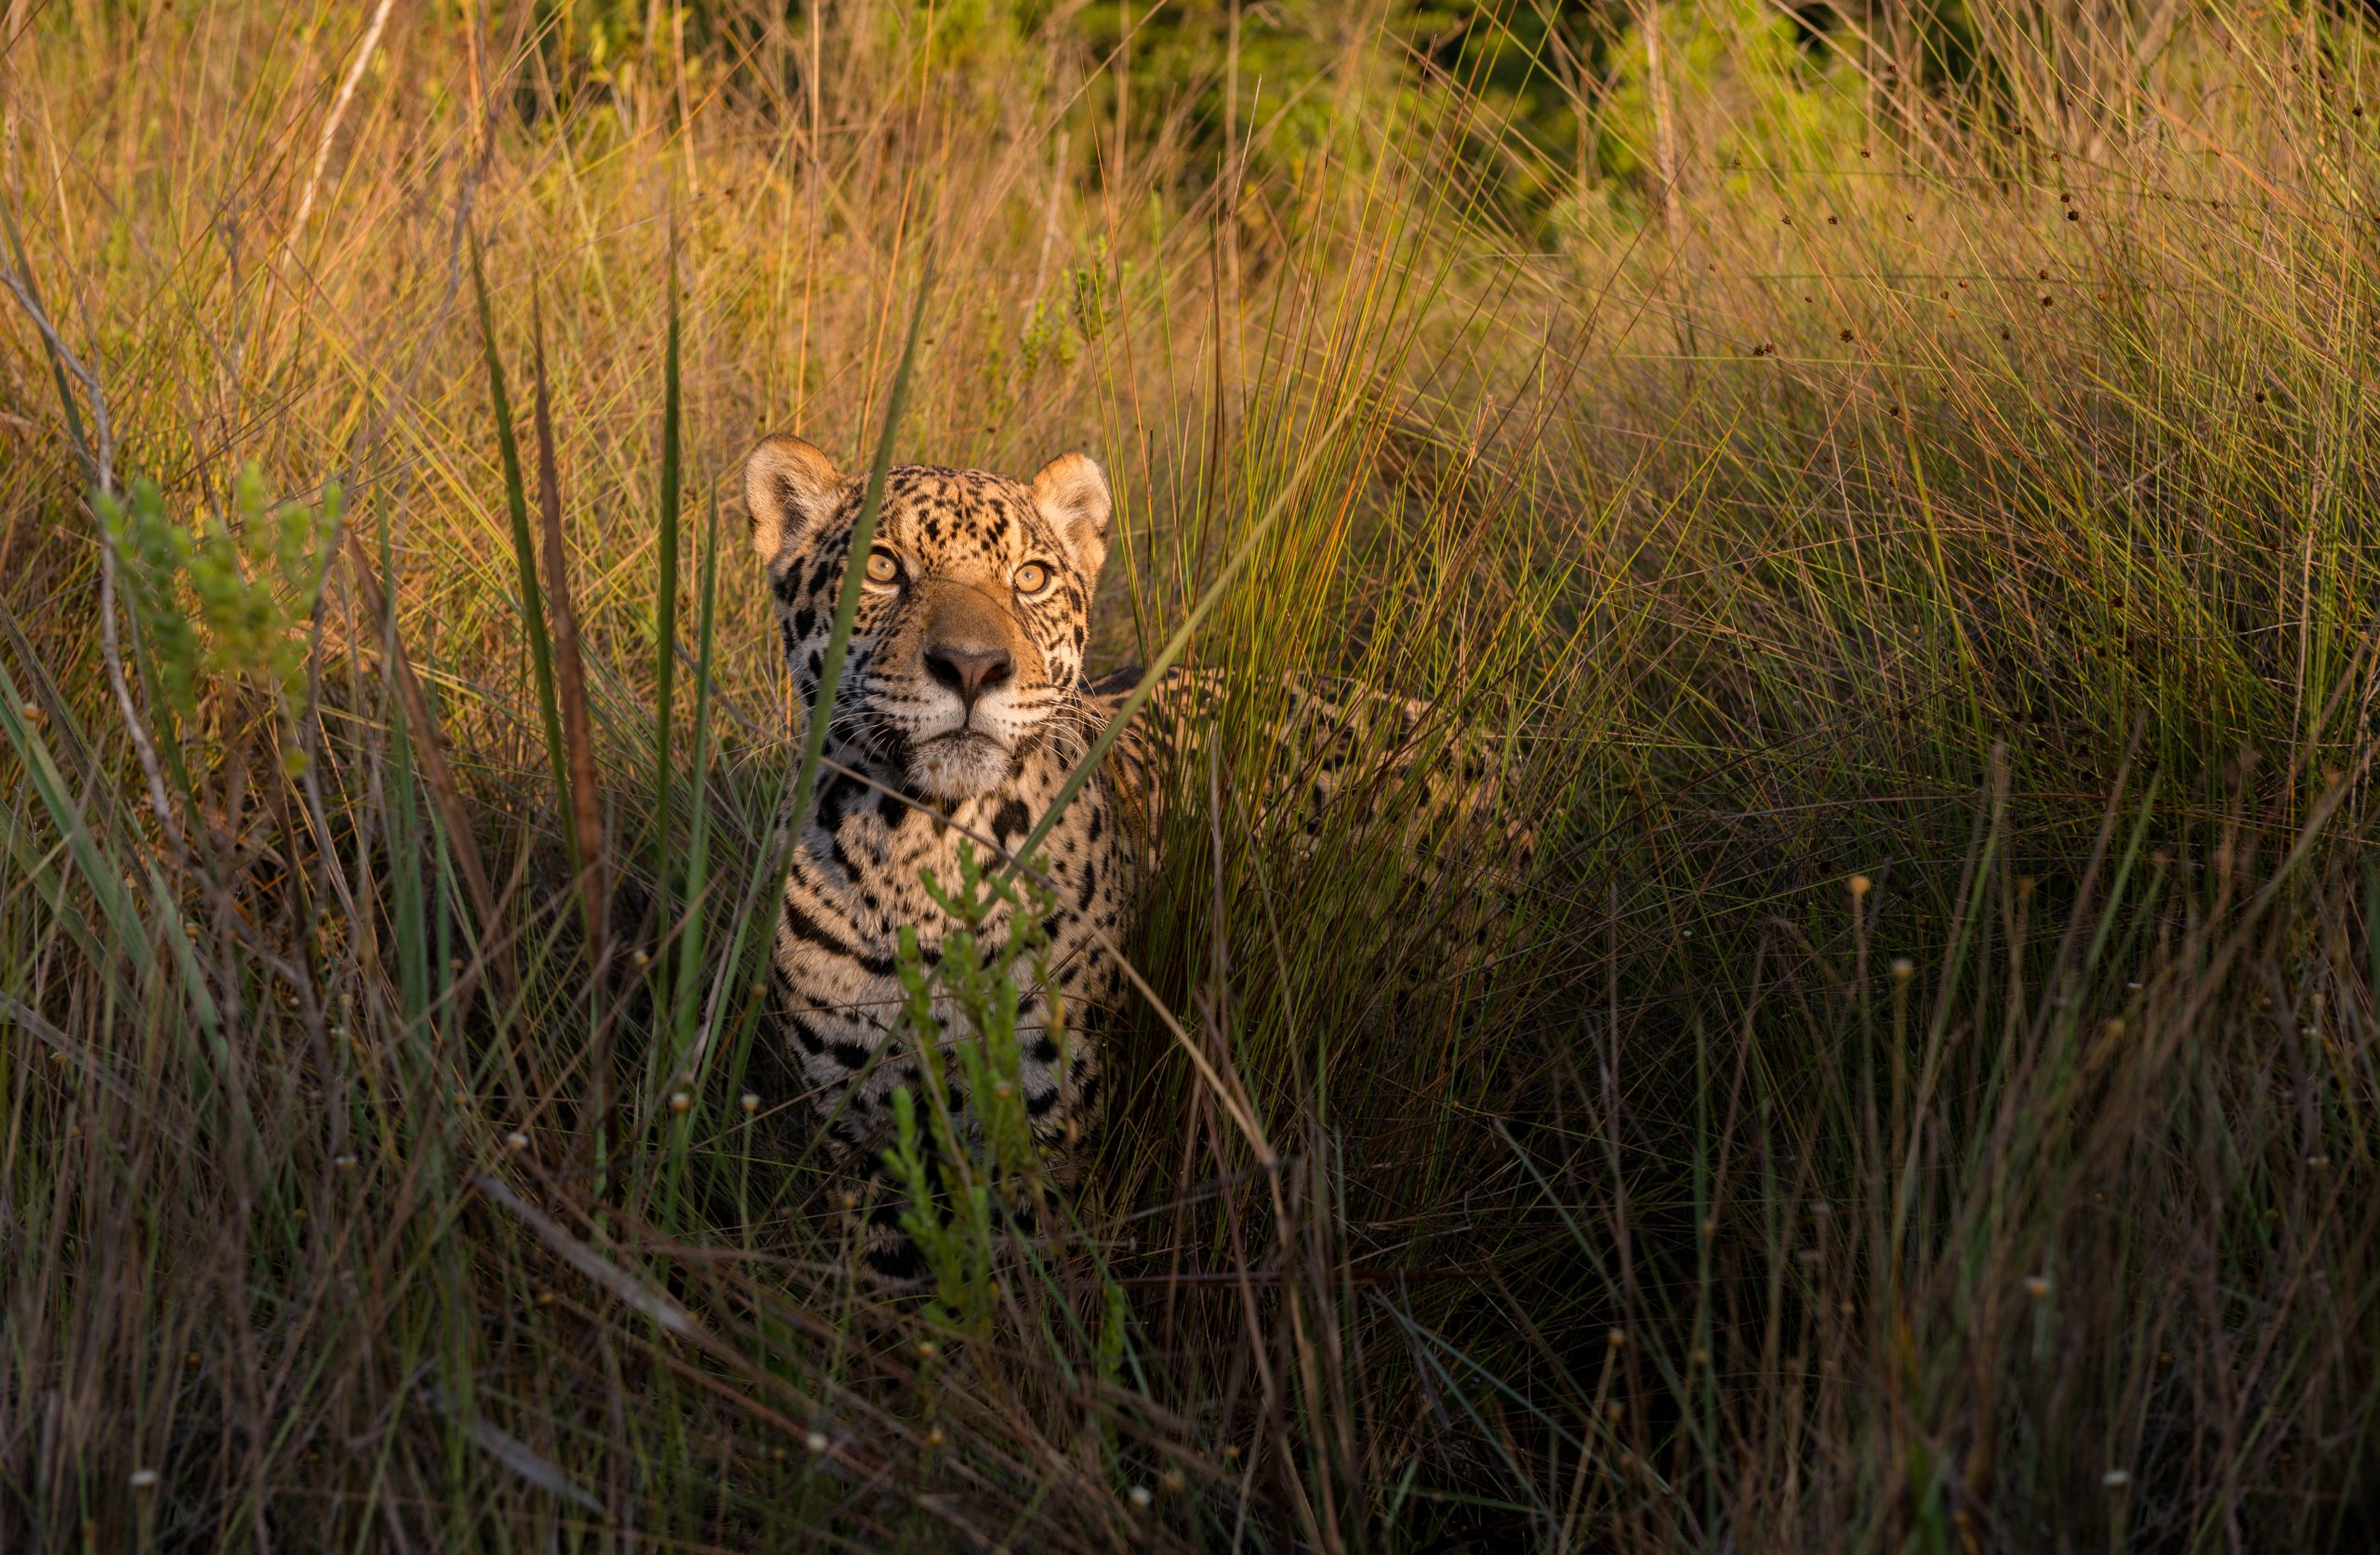 <p>A jaguar in the grasslands of the Cerrado, a biodiverse South American biome vulnerable to climate change. Observers hope that the Kunming Fund, announced at October&#8217;s COP15 biodiversity talks may provide a boost to nature conservation and protection in Latin America. (Image: Octavio Campos Salles / Alamy)</p>